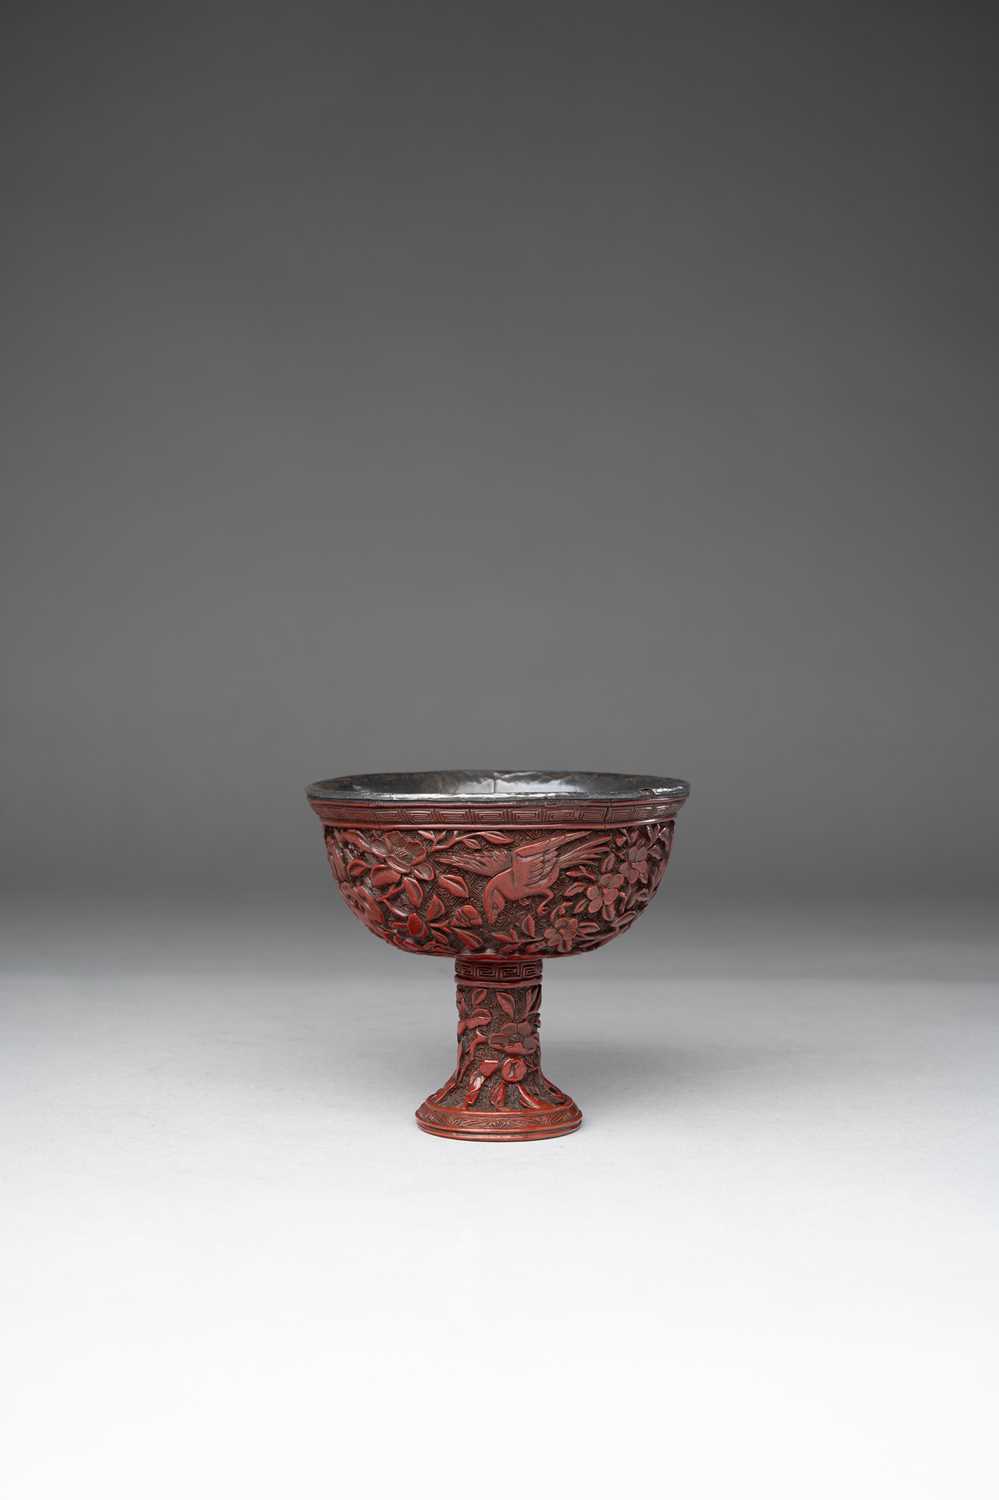 A CHINESE YUNNAN-TYPE CINNABAR LACQUER STEM CUP LATE MING DYNASTY Carved with four magpies among